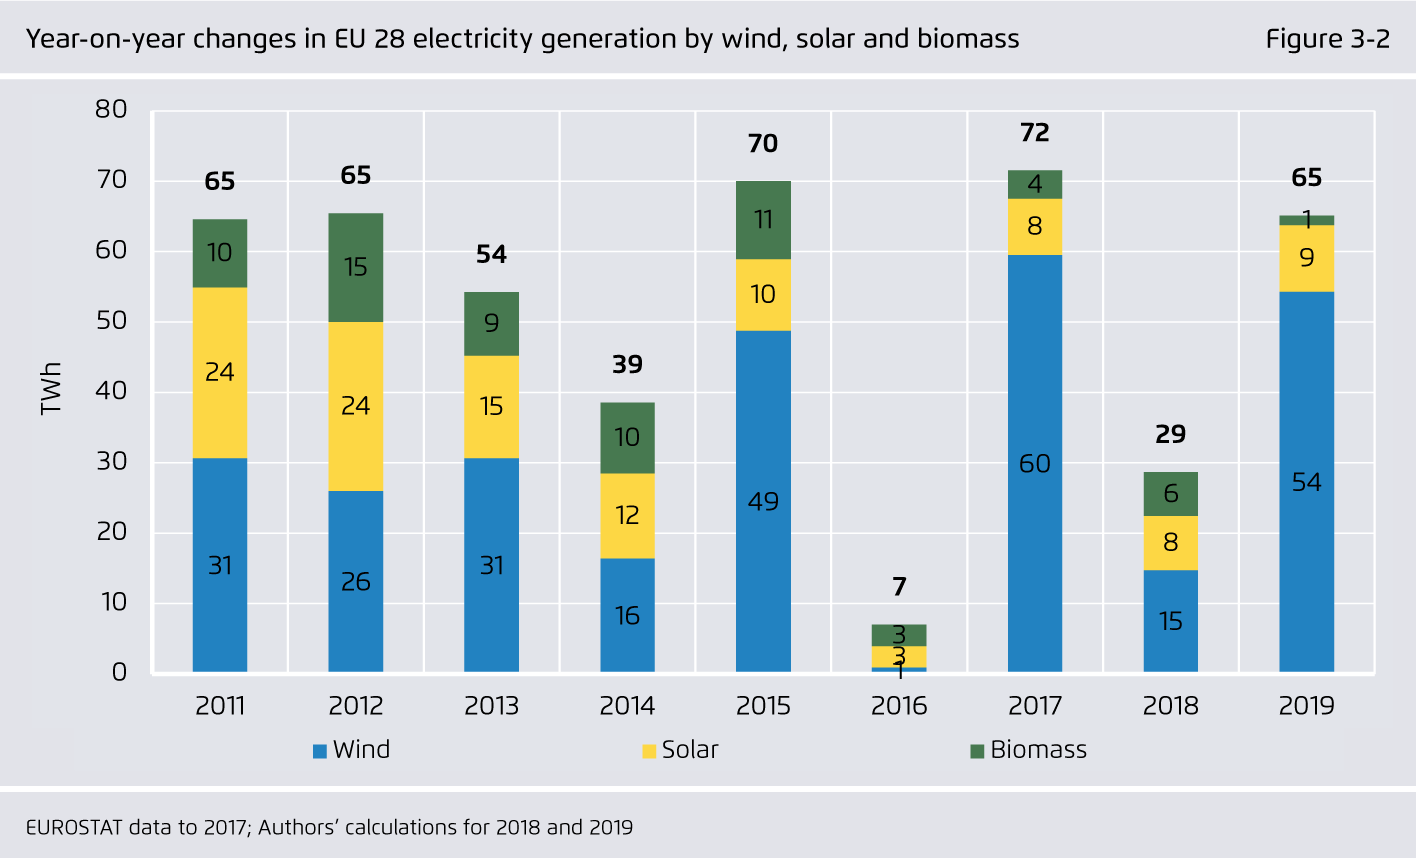 Preview for Year-on-year changes in EU 28 electricity generation by wind, solar and biomass